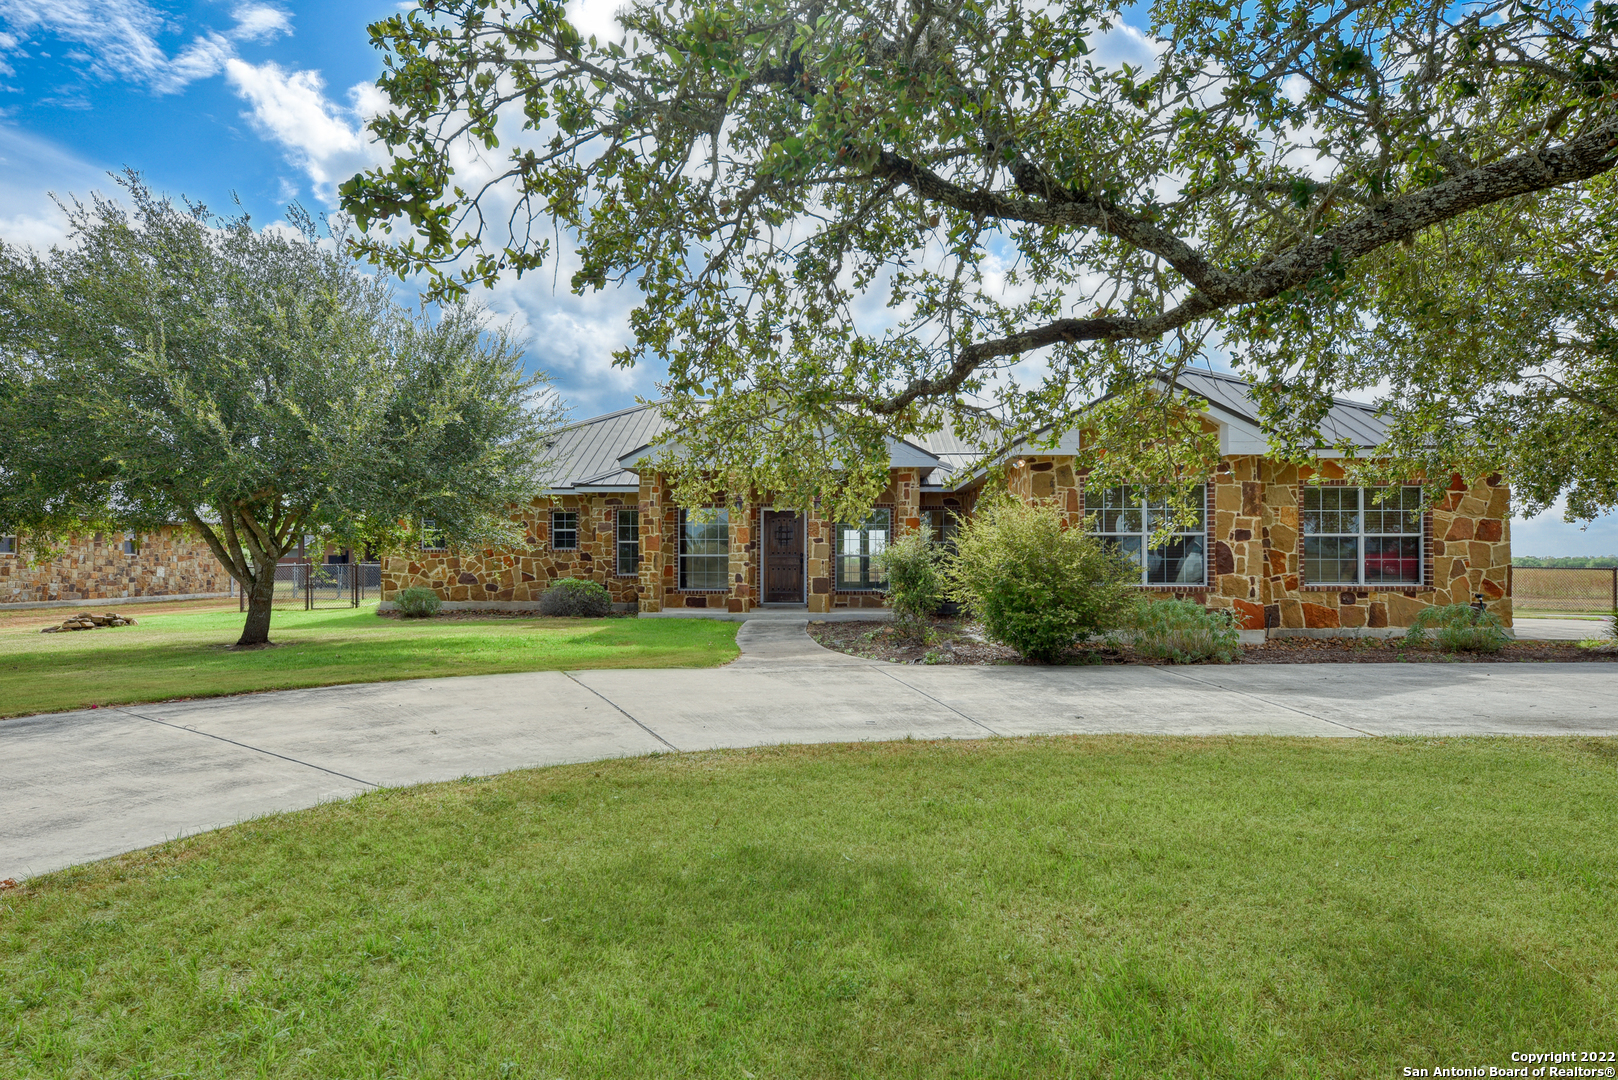 Fall in love with this CHARMING custom home on just under one acre! Minutes away from Seguin, this beautiful home fits any lifestyle as it offers a rural setting, but still within a short drive from all the amenities of the surrounding areas. The home boast a split floor plan with 3 oversized bedrooms and 2 bathrooms. Cook and entertain in your elegant, chef inspired kitchen with an expansive granite bar top and custom movable island with matching granite. Guests or family can overflow from the kitchen into the spacious living area within this open concept floor plan. If entertaining isn't on the schedule, relax on your back porch next to the outdoor fireplace with only the sounds of the fire crackling and whistle of wind flowing through the beautiful oak trees.  After a long day, kick off your shoes and retire into your oversized primary suite. You will be captivated by the master bathroom with its double vanities, large spa-like multi-head soaking shower and immense storage! Must-see property! Sold As-Is.